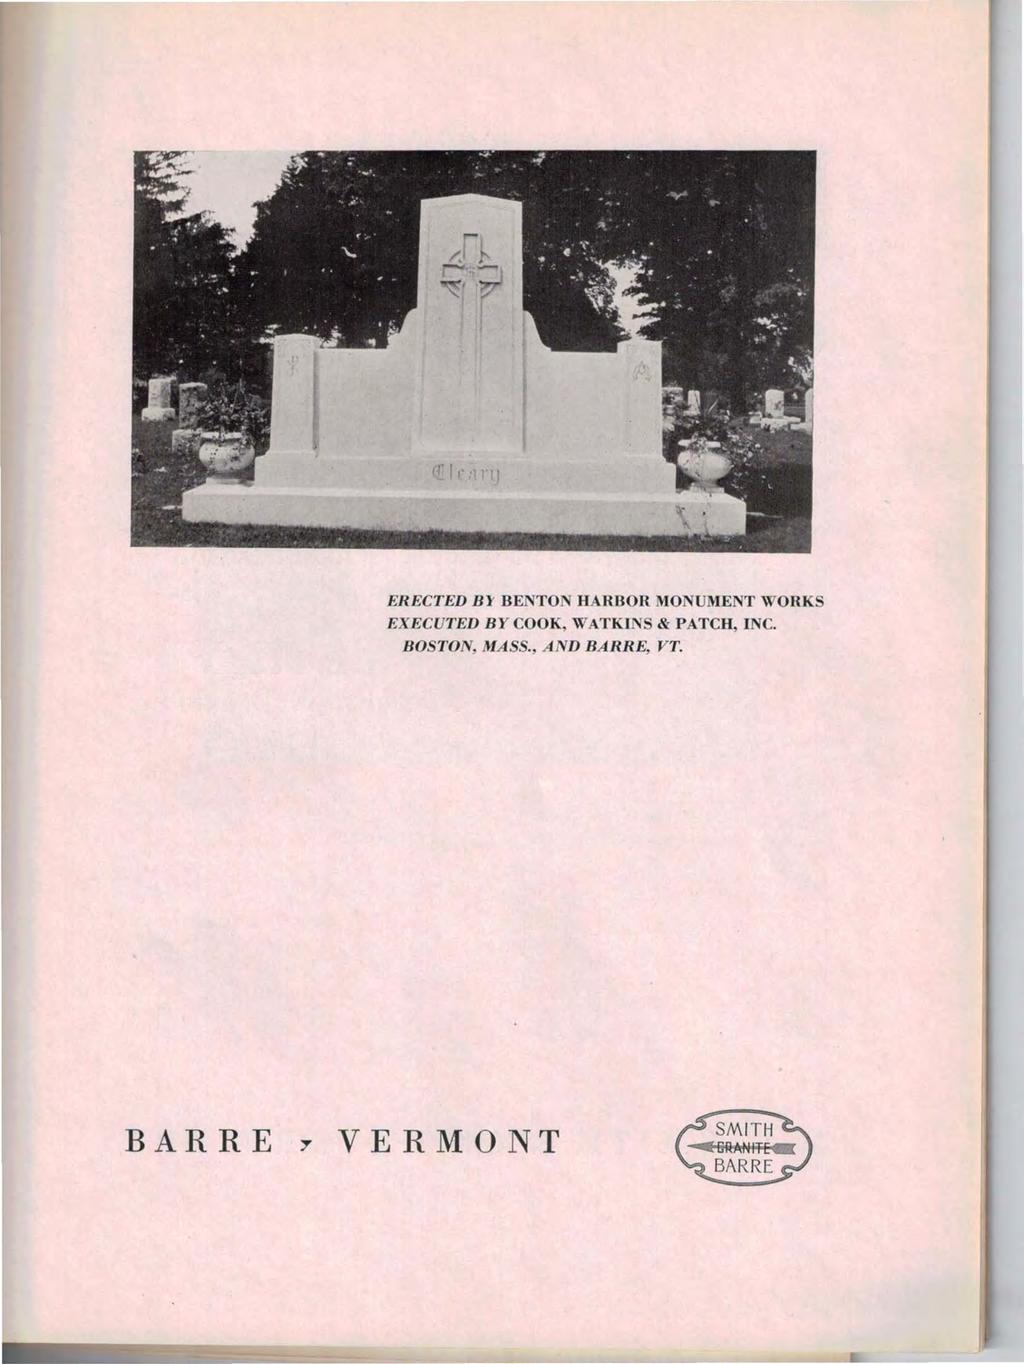 (fl(',llt ERECTED Bl' BENTON HARBOR MONUMENT WORKS EXECUTED BY